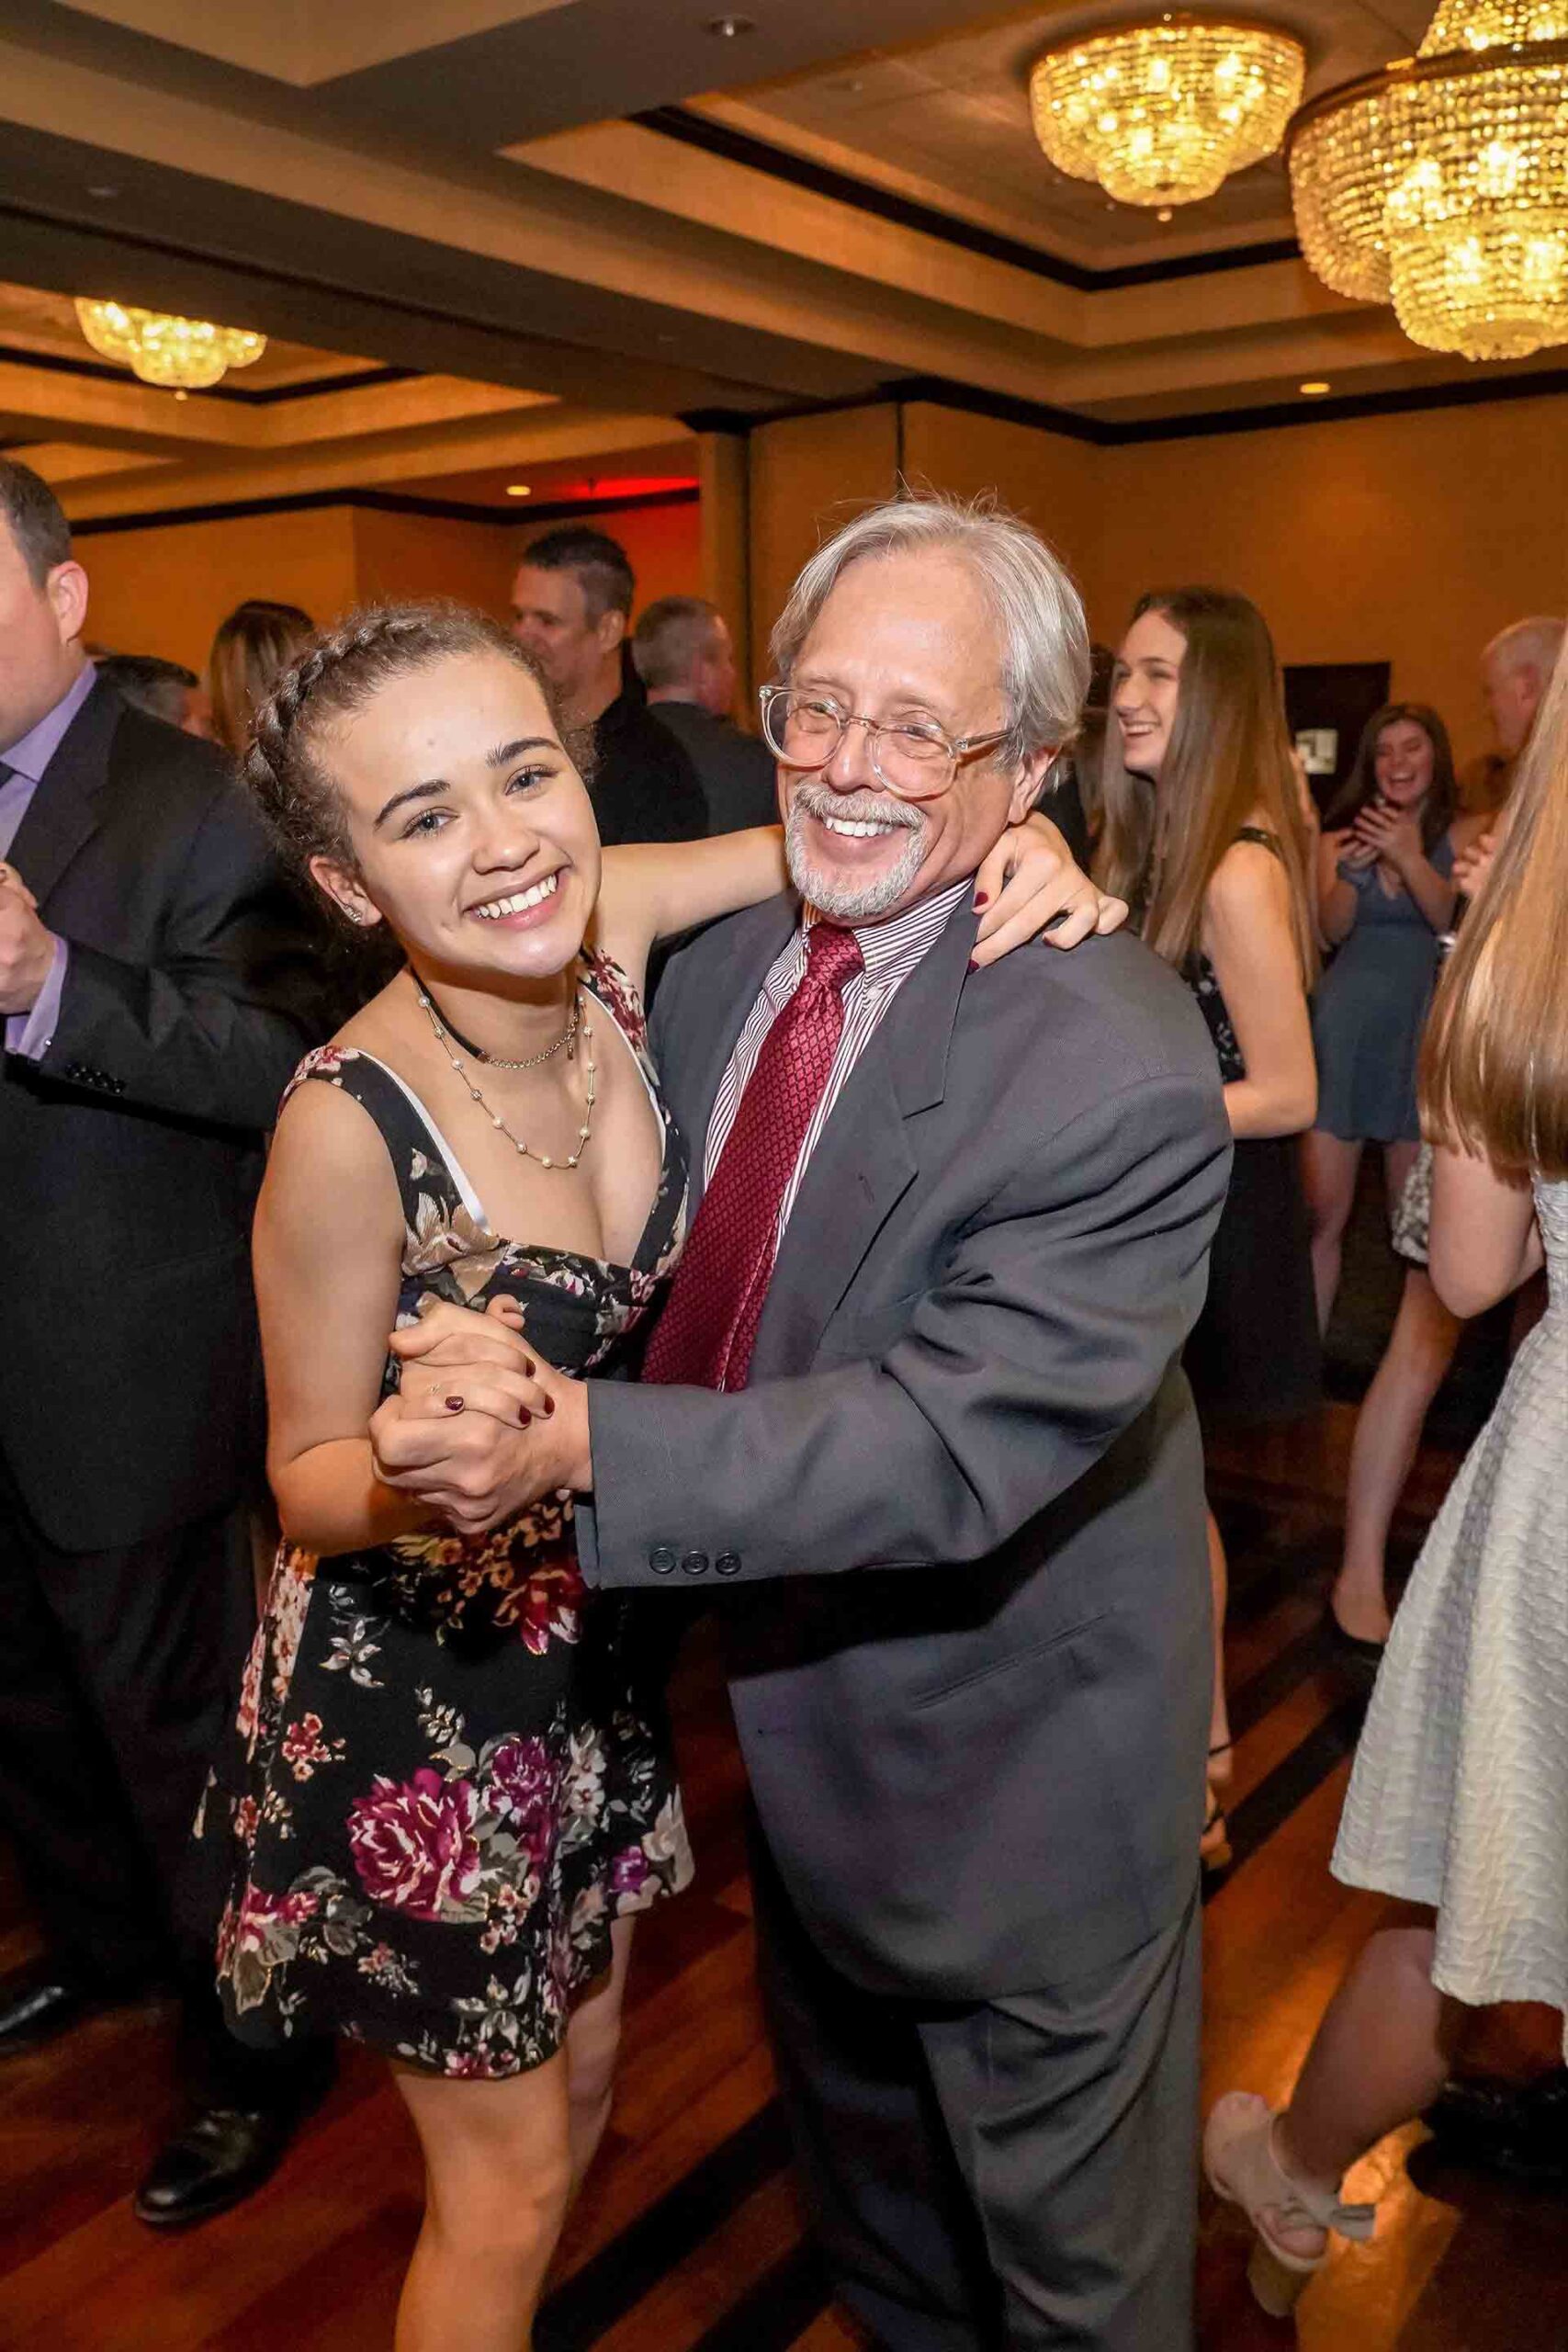 father-daughter-dance-2019-father-with-clear-glasses-dancing-with-daughter